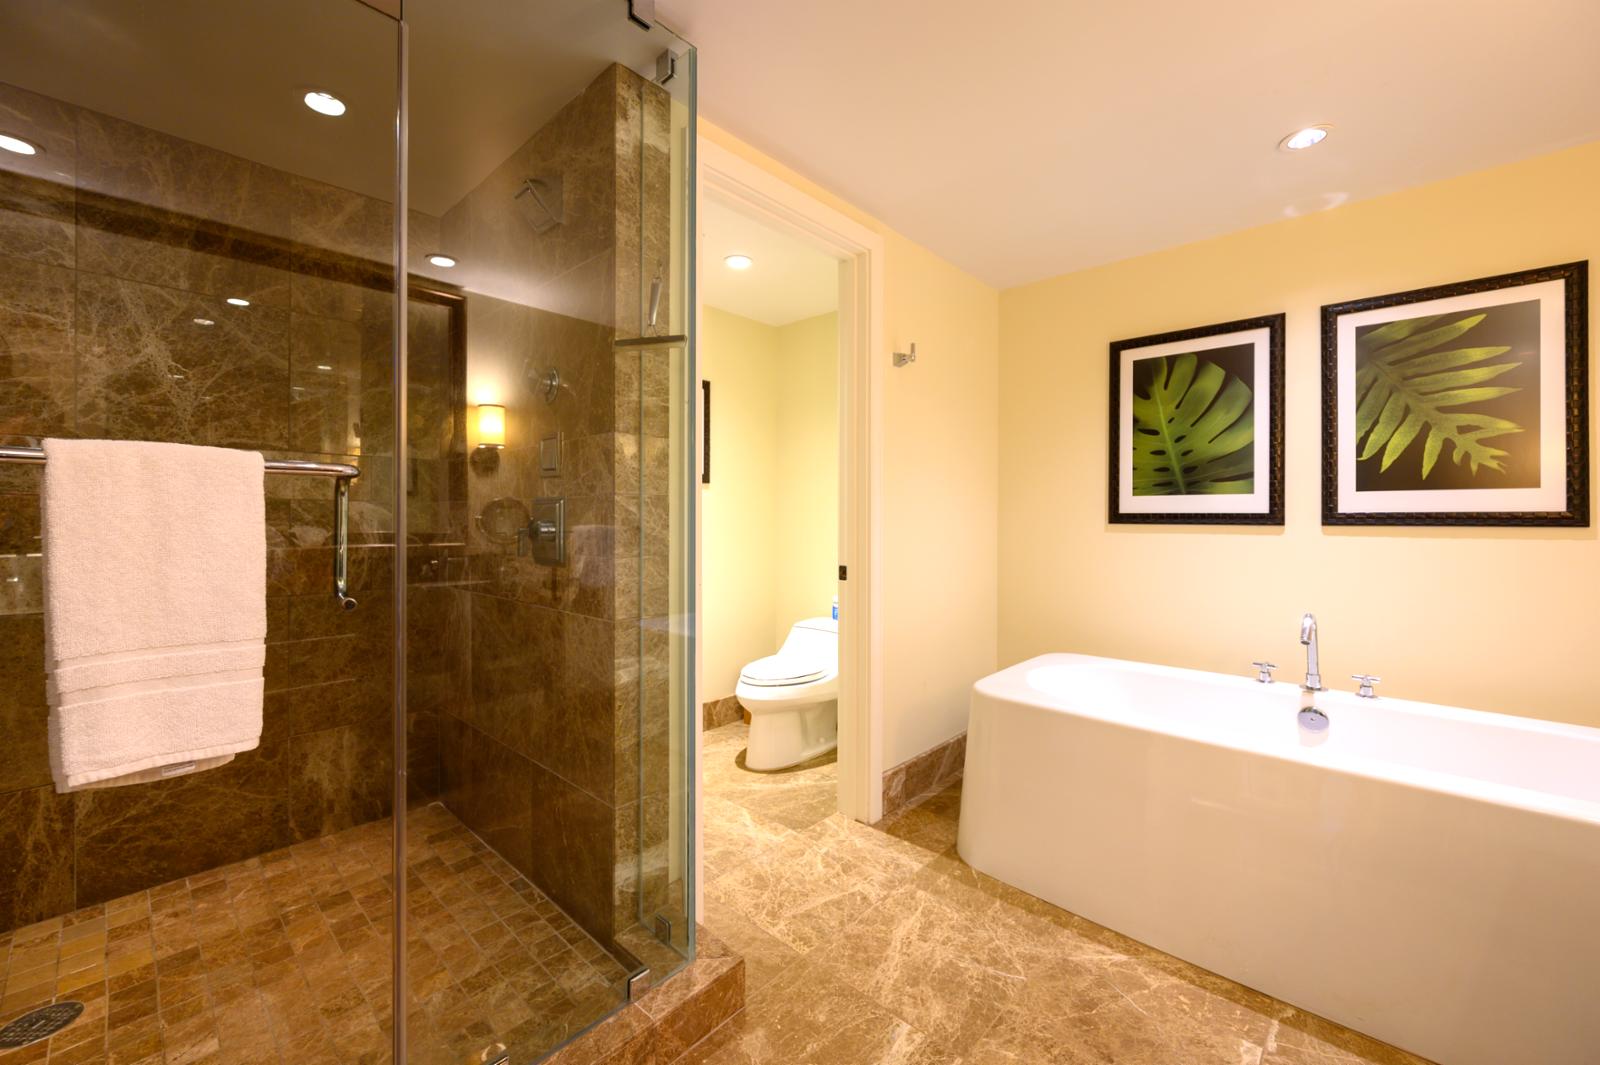 Oversized layout with glass enclosed shower and tub combination